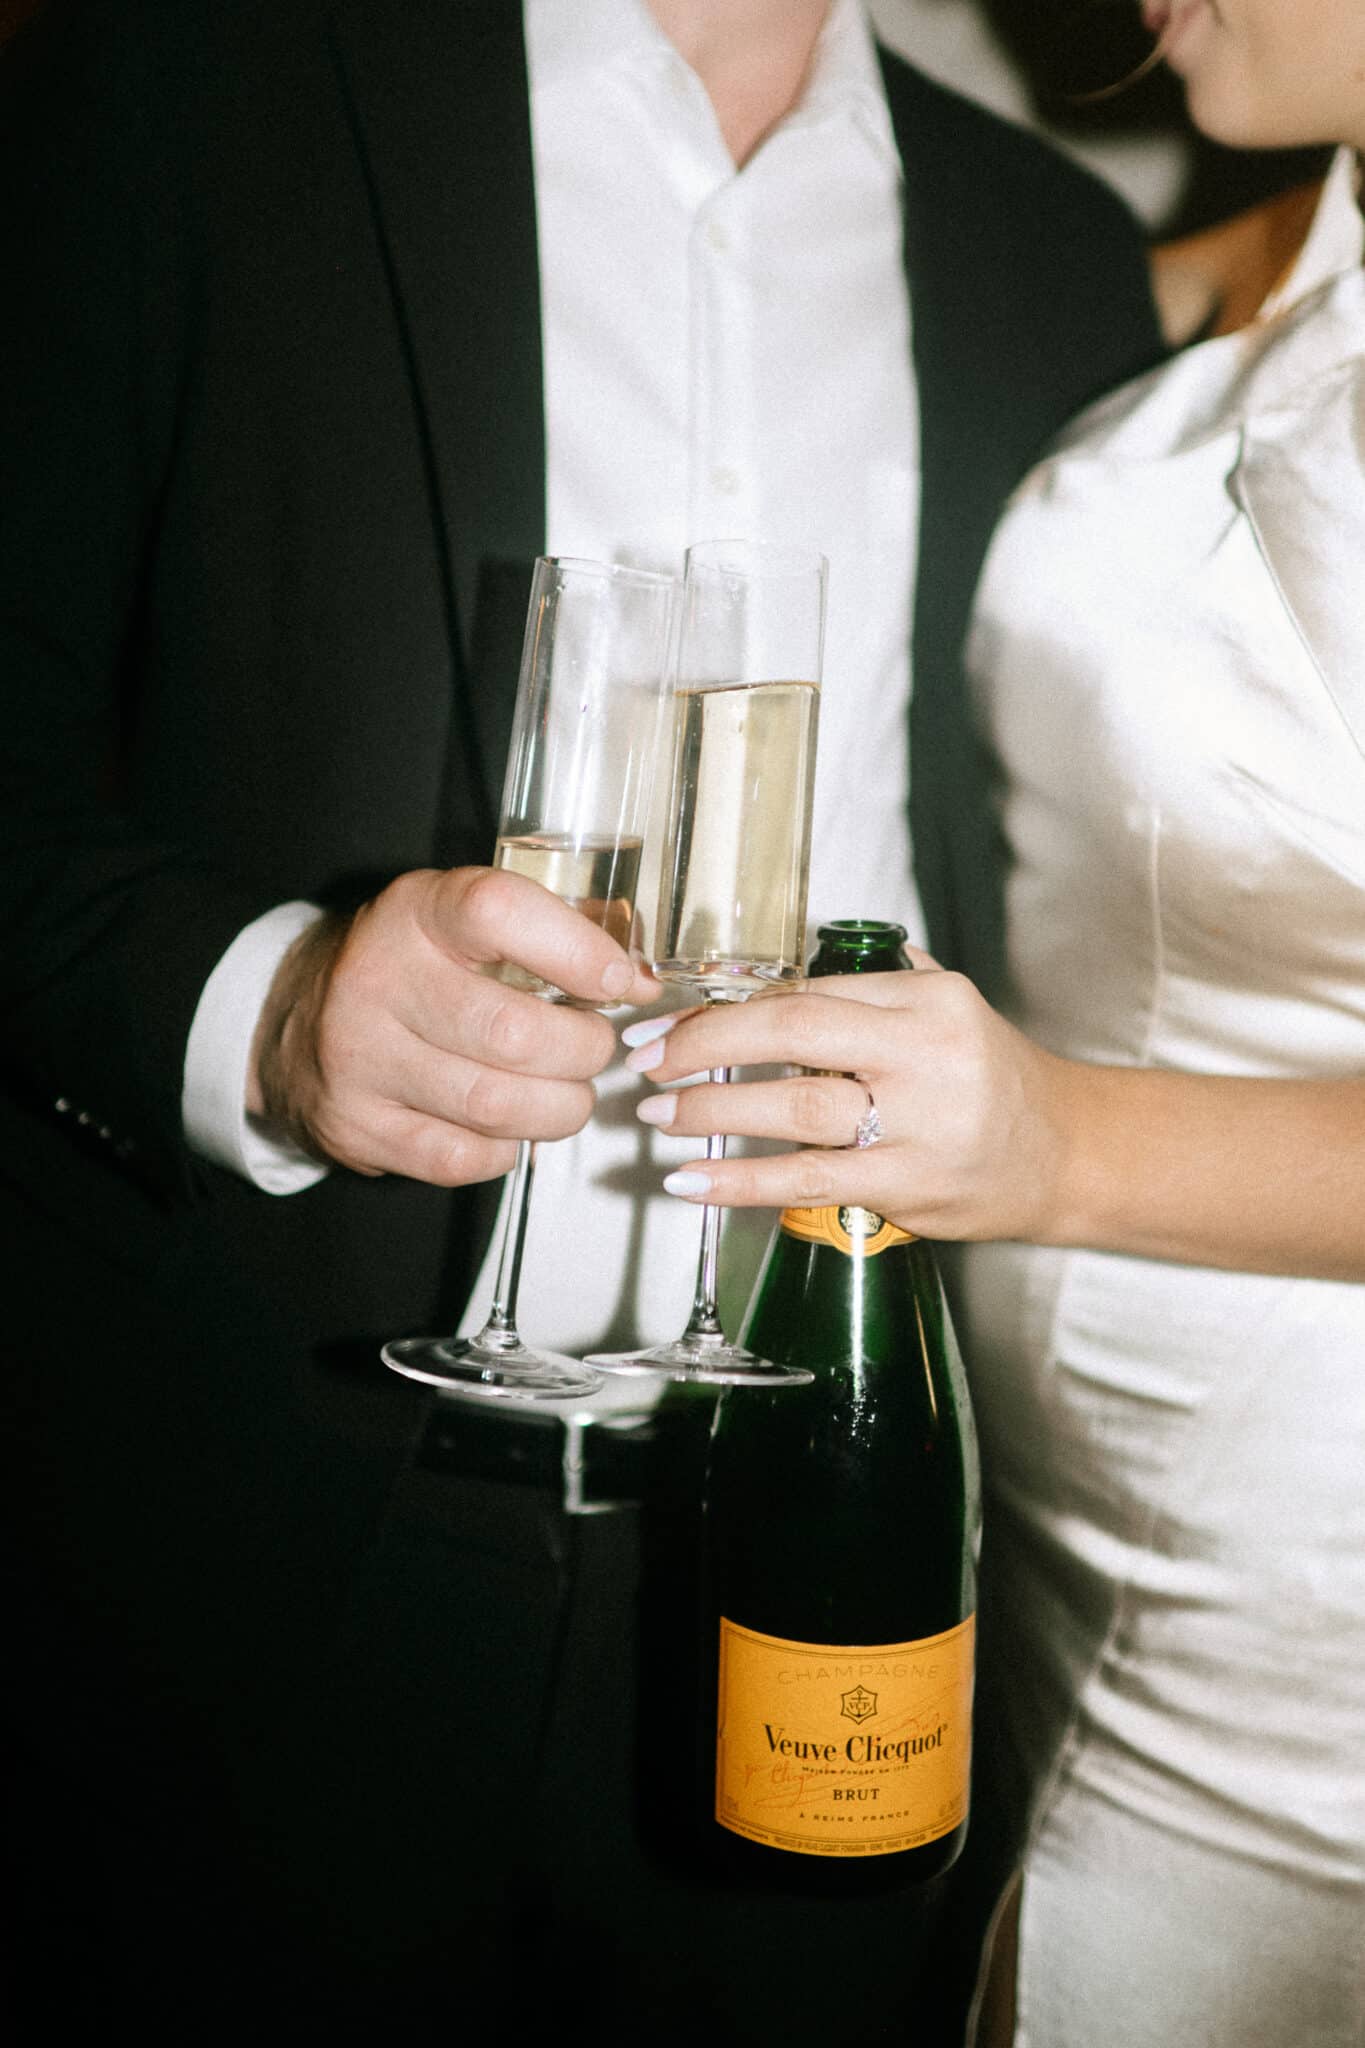 close up image of engaged couple holding glasses of champagne together with bottle of champagne behind the glasses